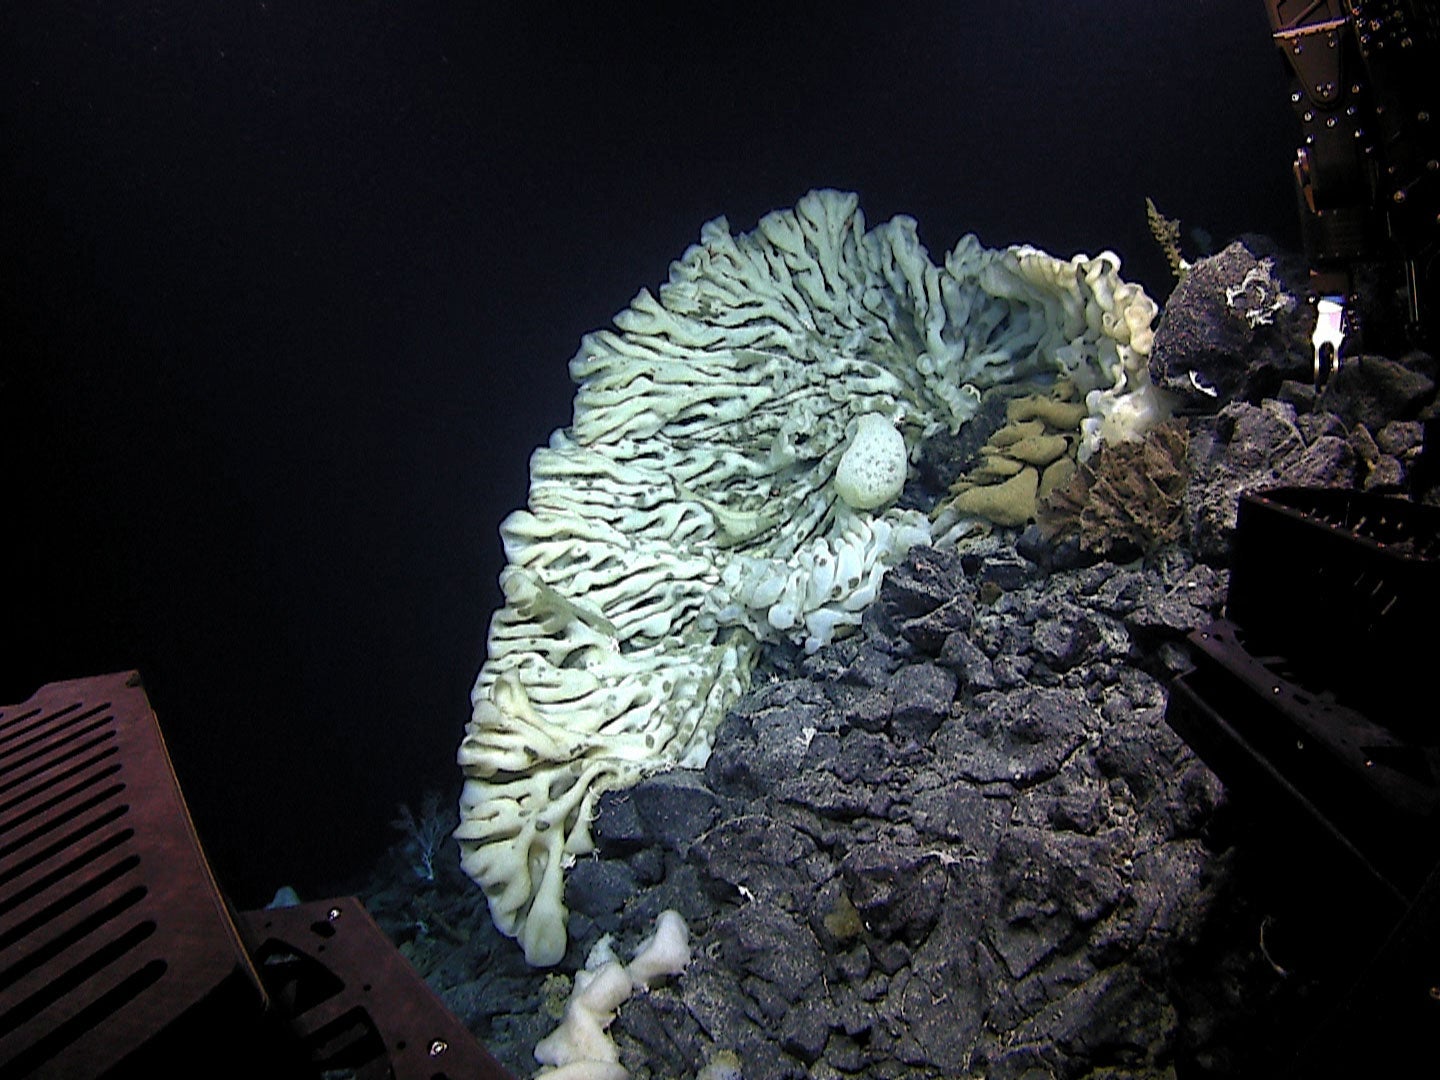 A study published this week in the scientific journal Marine Biodiversity described the massive sponge after a year of study.